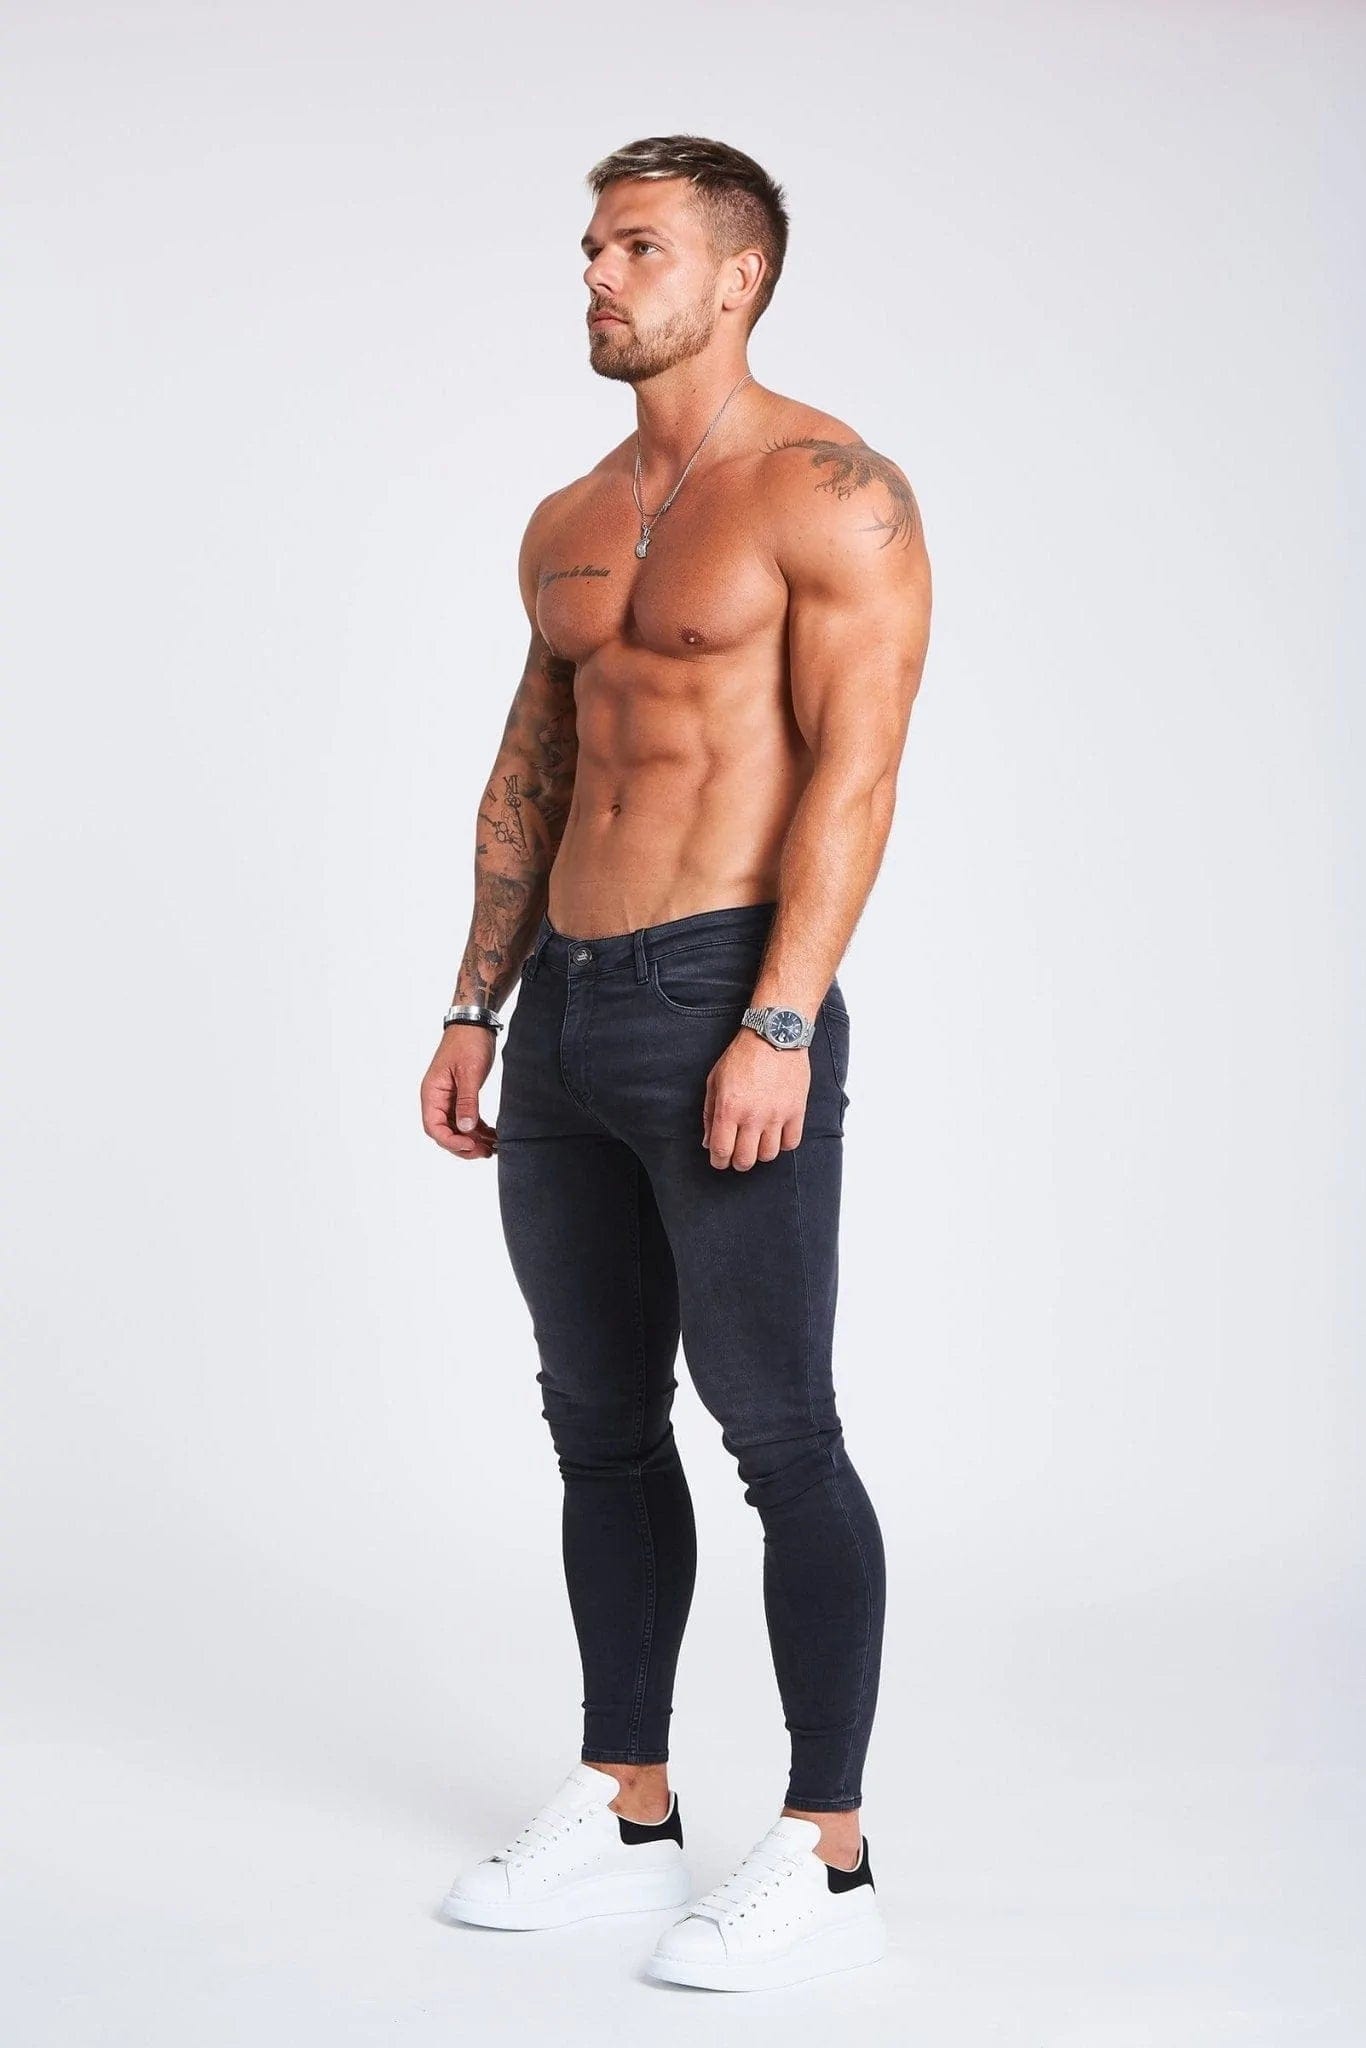 GREY JEANS - NON RIPPED – Legend London